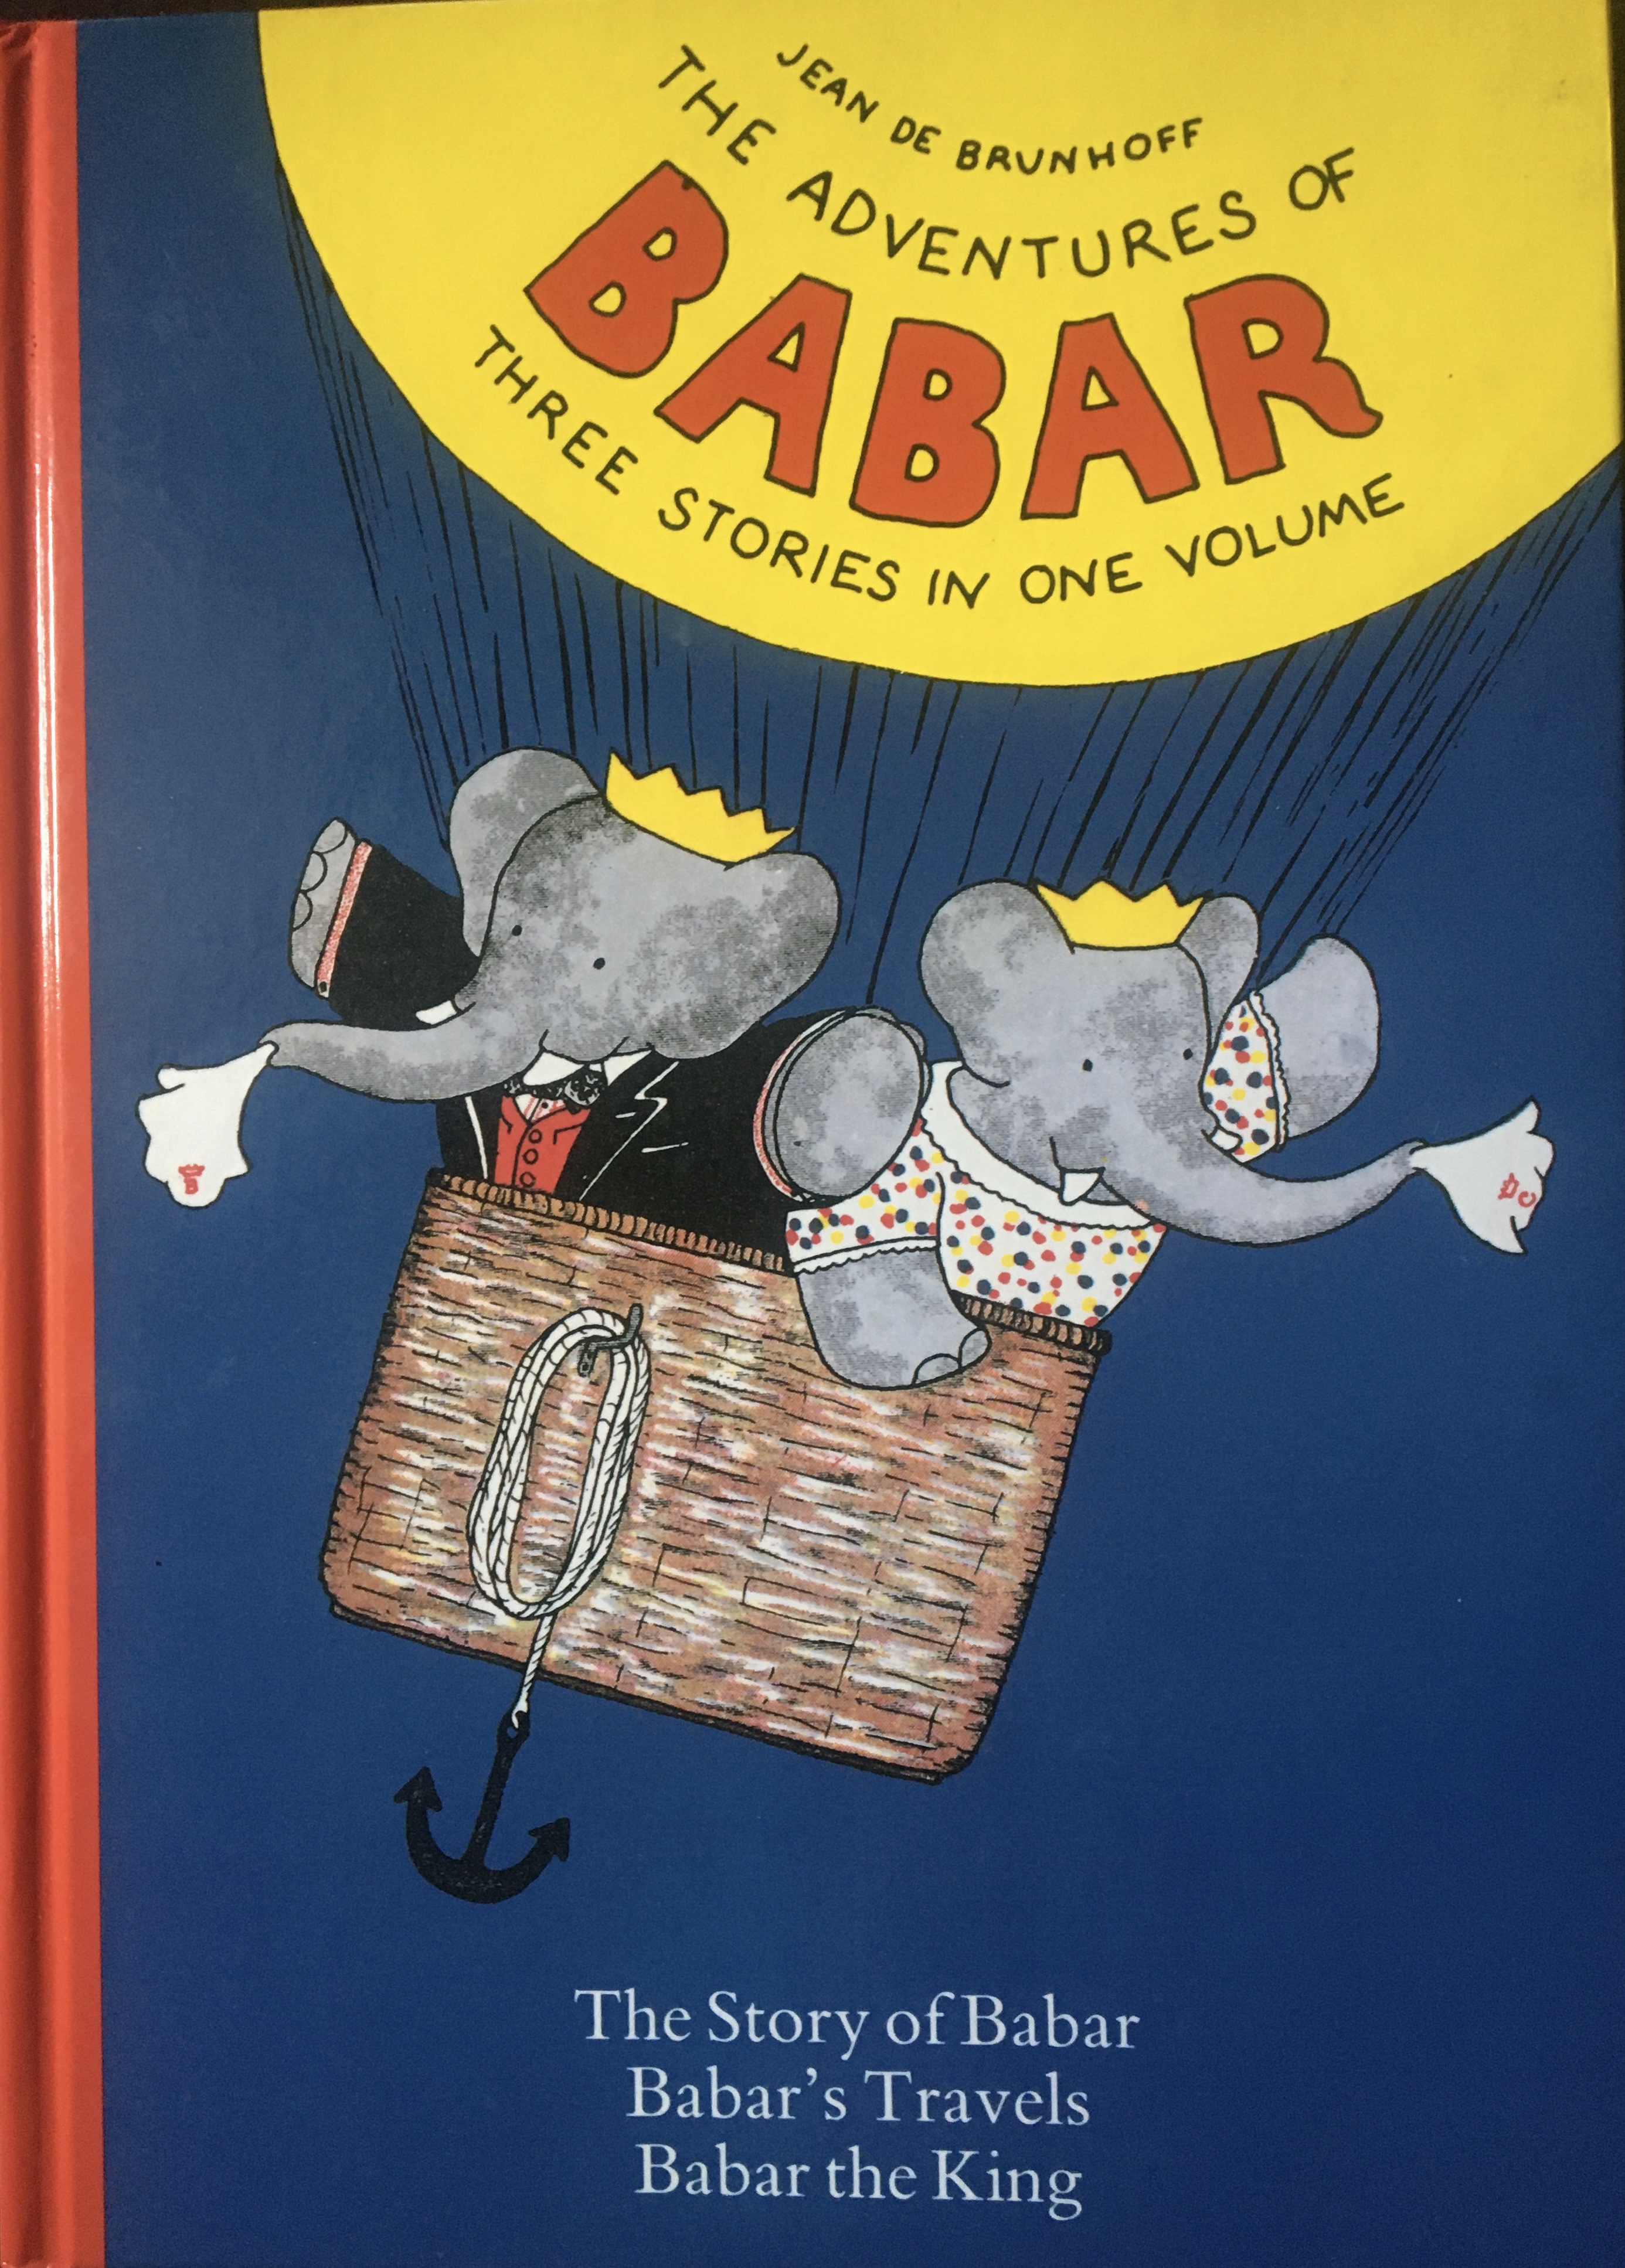 of　the　King　Brunhoff,　Babar:　Babar's　The　Story　Hardcover　of　Babar　De:　Babar.　Books　Travels.　by　Jean　1st　New　(1990)　Edition　Bernhards　The　Adventures